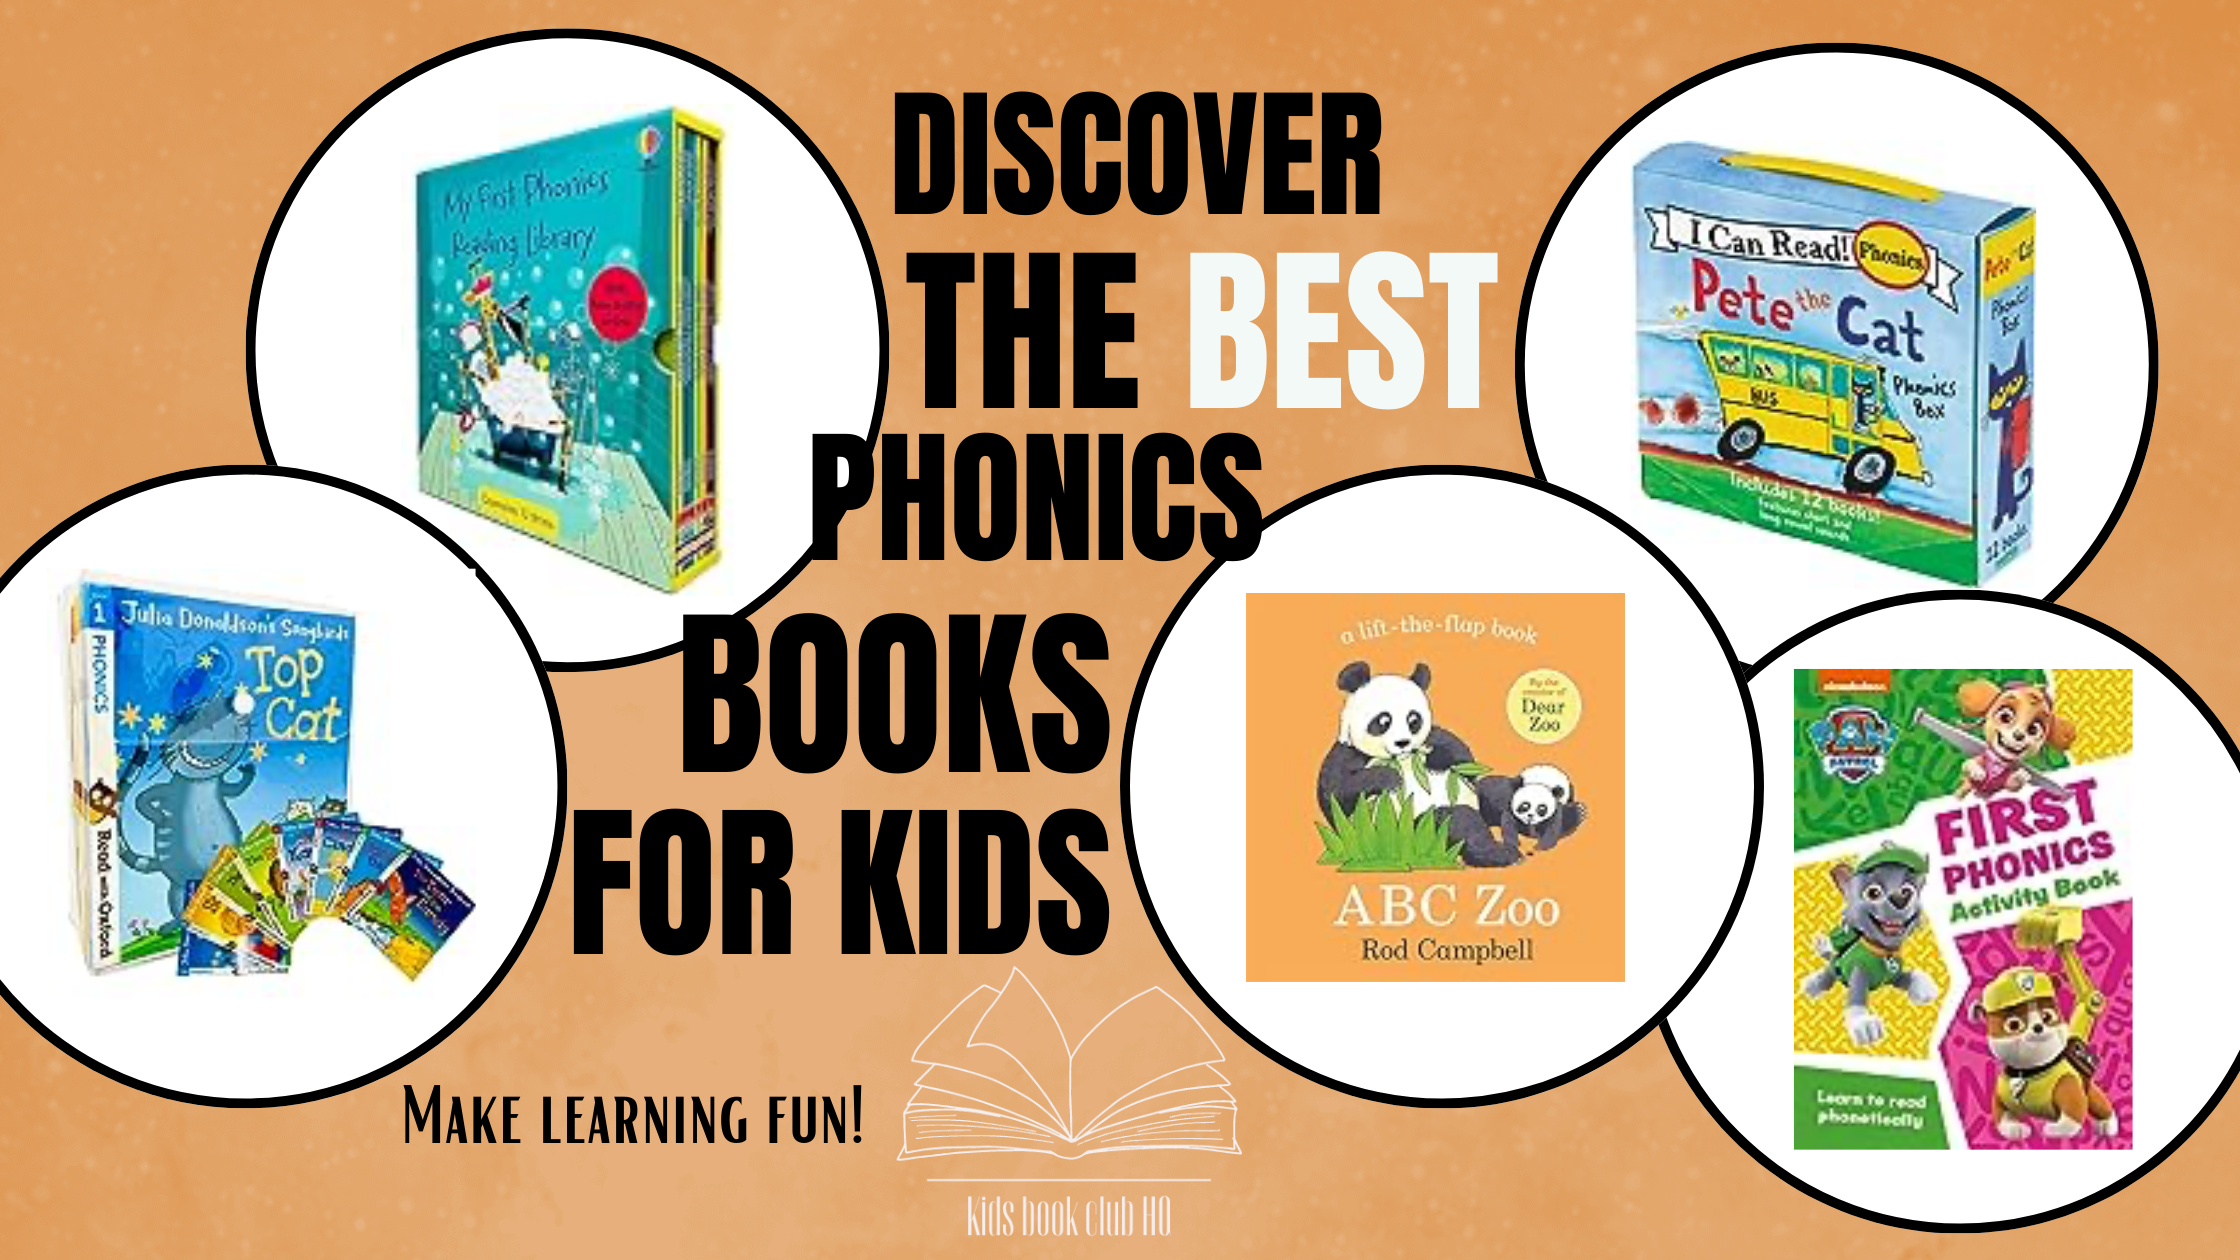 Discover the Best Phonics Books for Kids